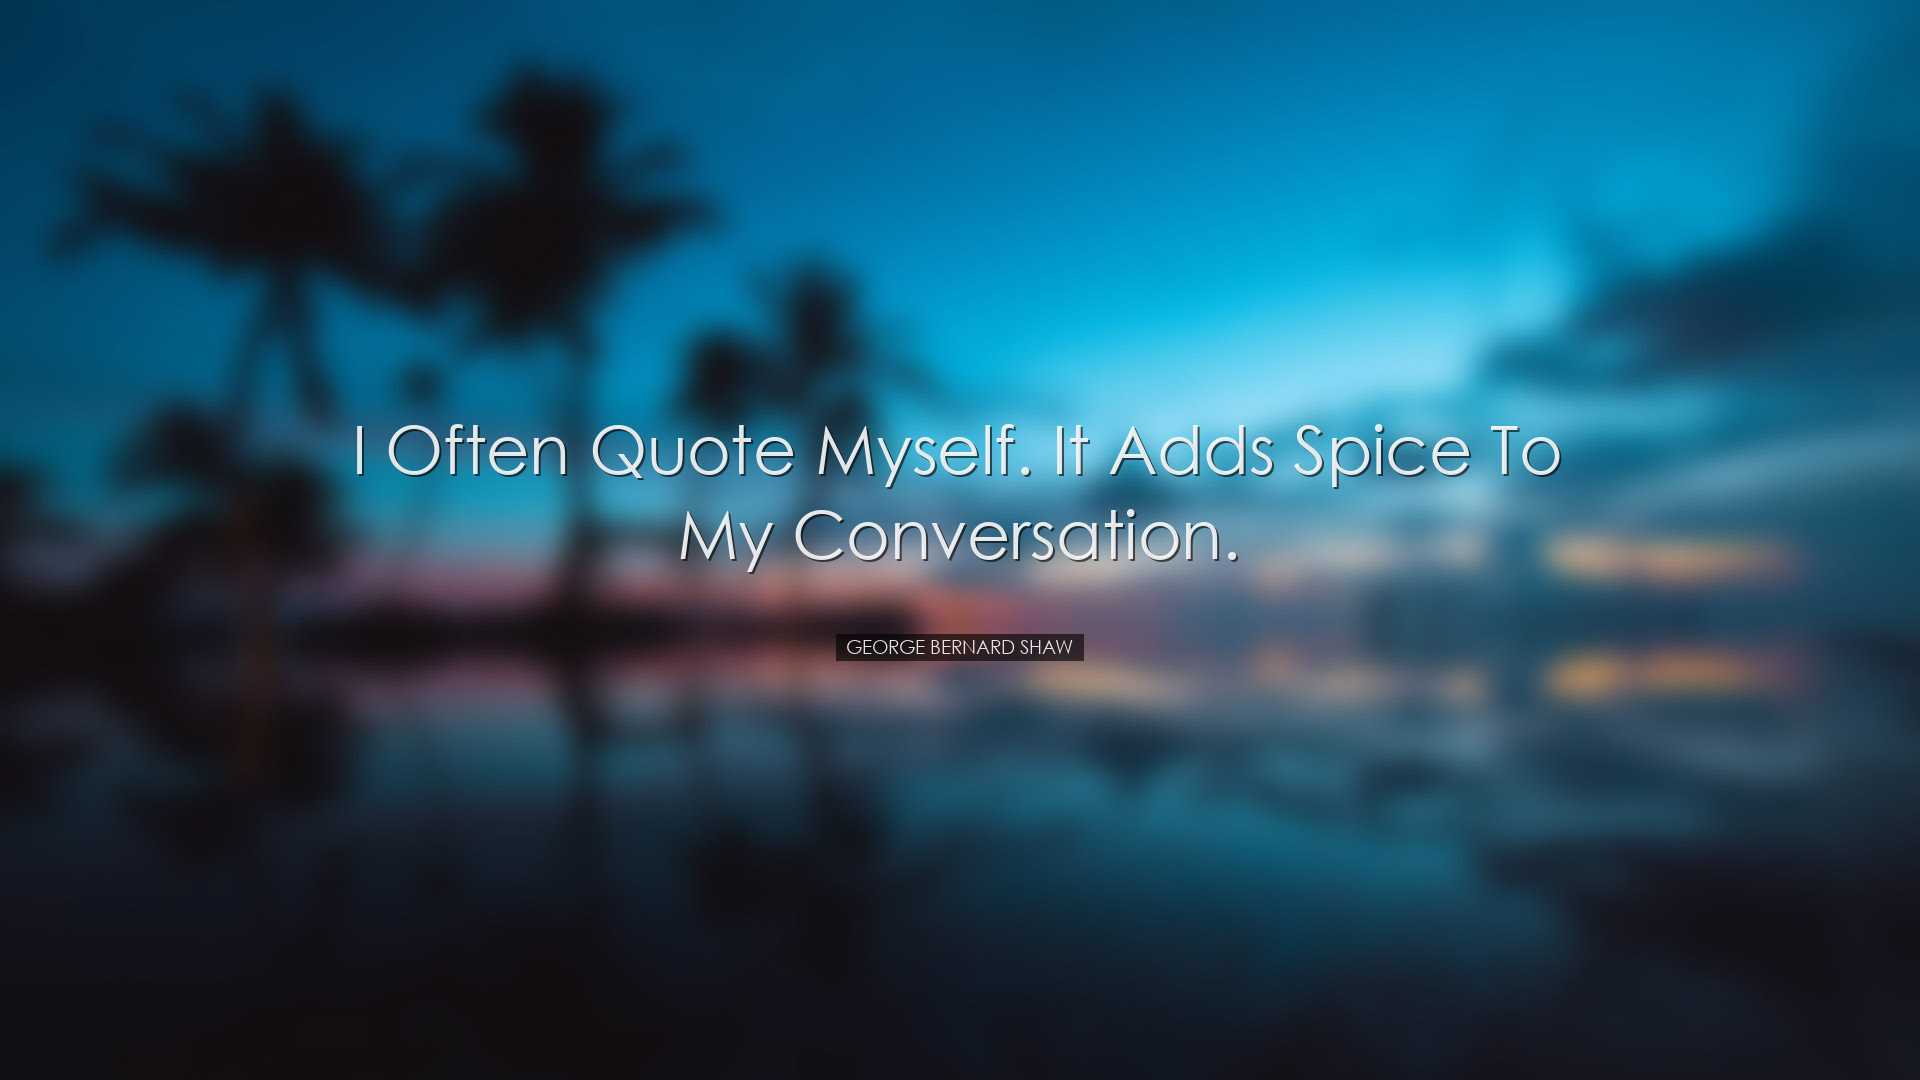 I often quote myself. It adds spice to my conversation. - George B